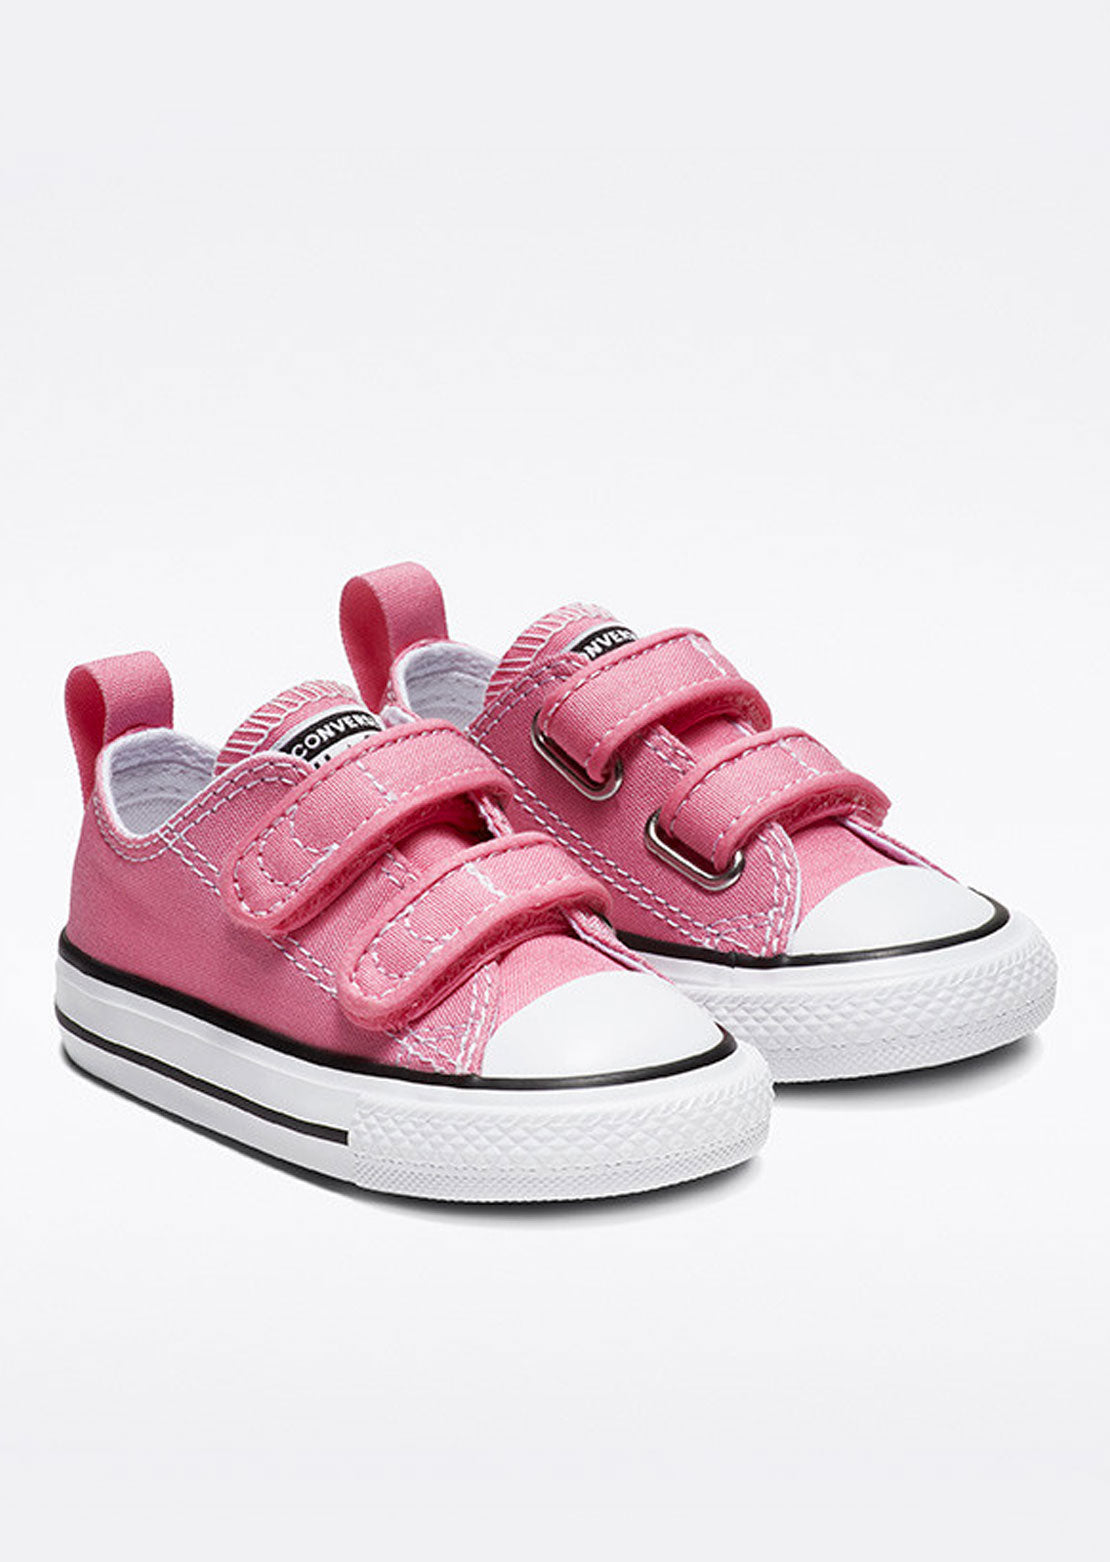 Converse Junior Toddler Chuck Taylor All Star 2V Shoes Pink